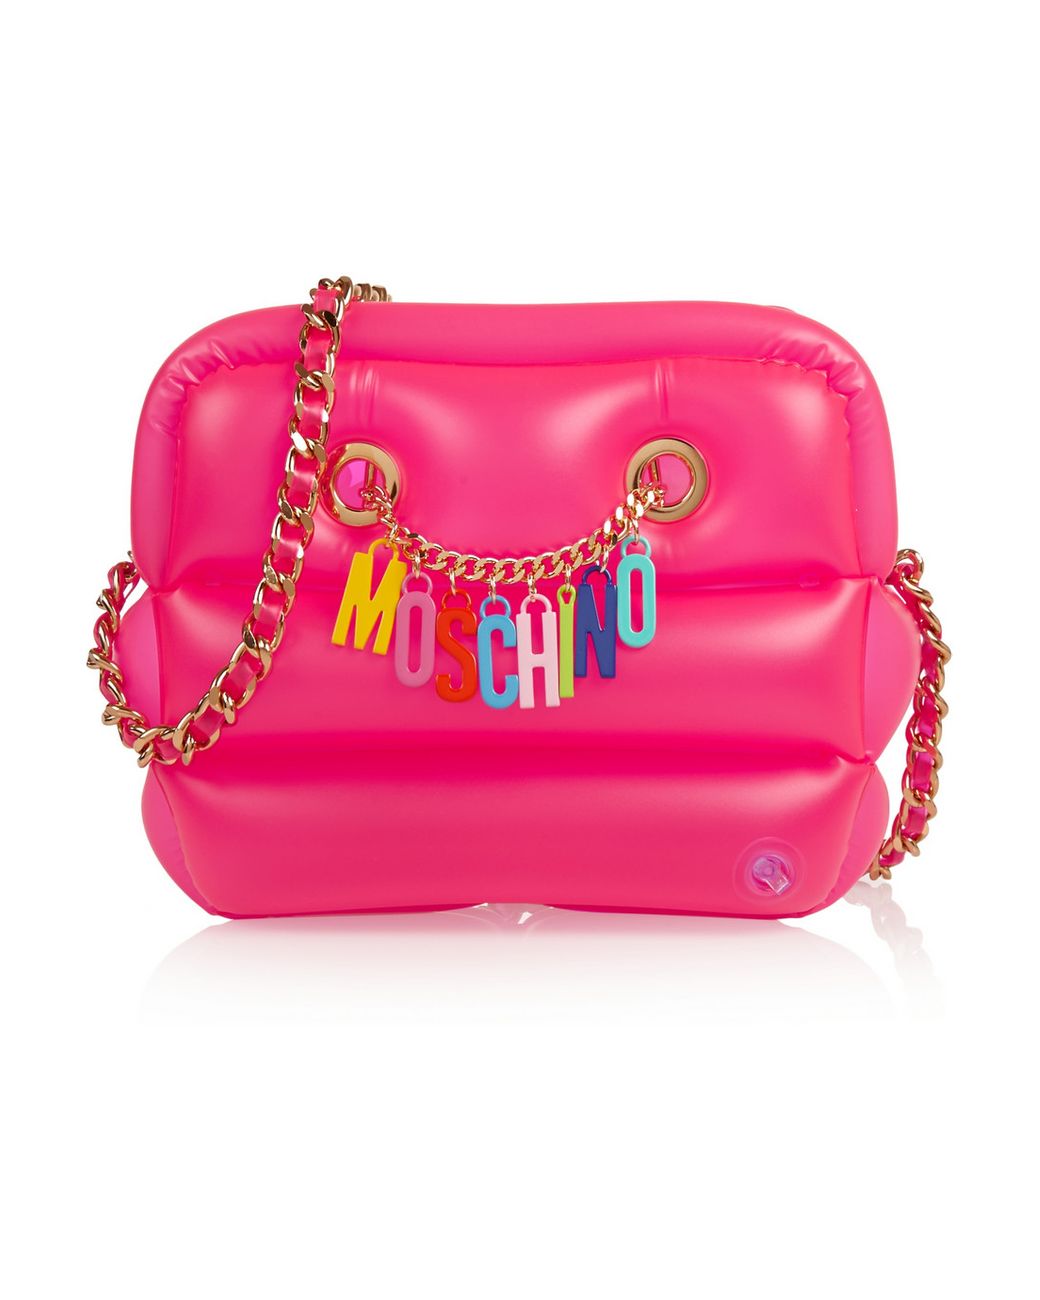 Moschino Inflatable Pvc Shoulder Bag in Pink | Lyst